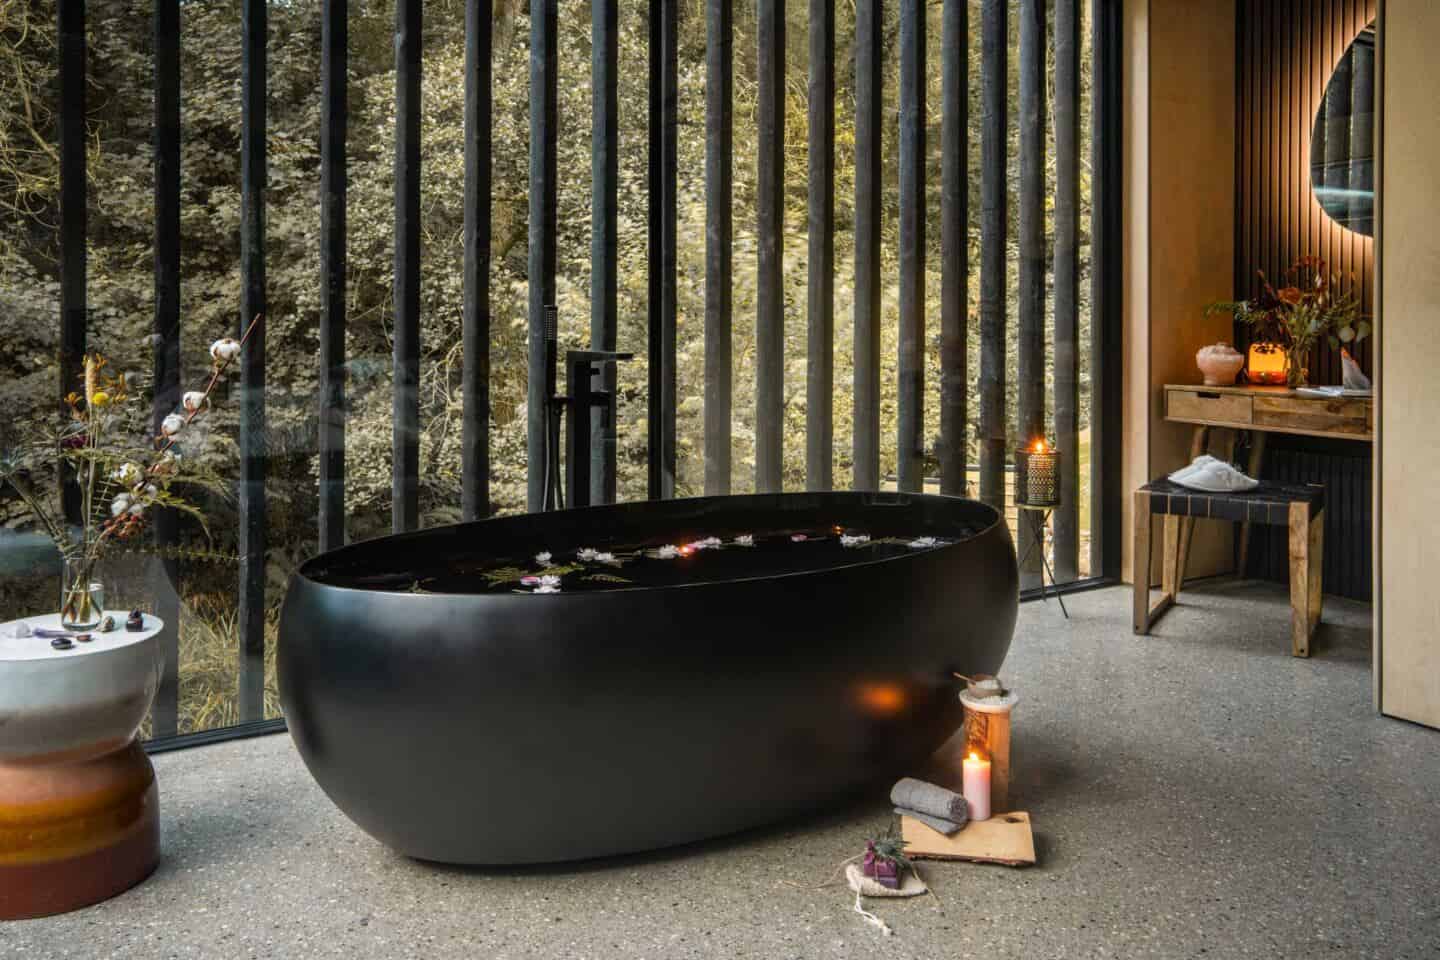 A large black freestanding bathtub in front of a large floor to ceiling window that overlooks the forest surrounding wildwood spa in north devon